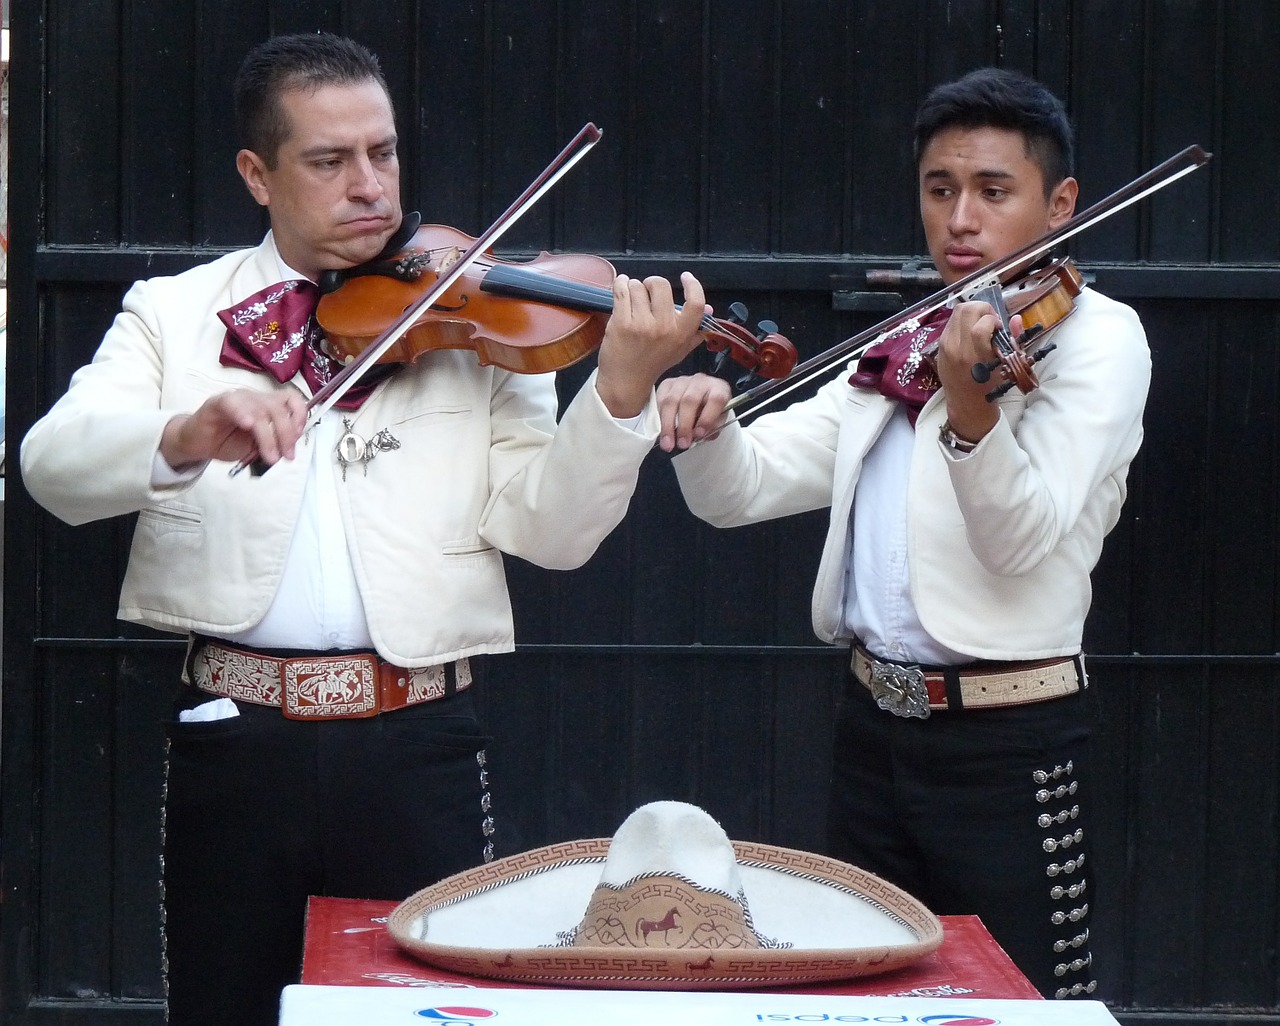 Mariachi in Plaza Garibaldi - an unmissable stop on a Mexico City itinerary.